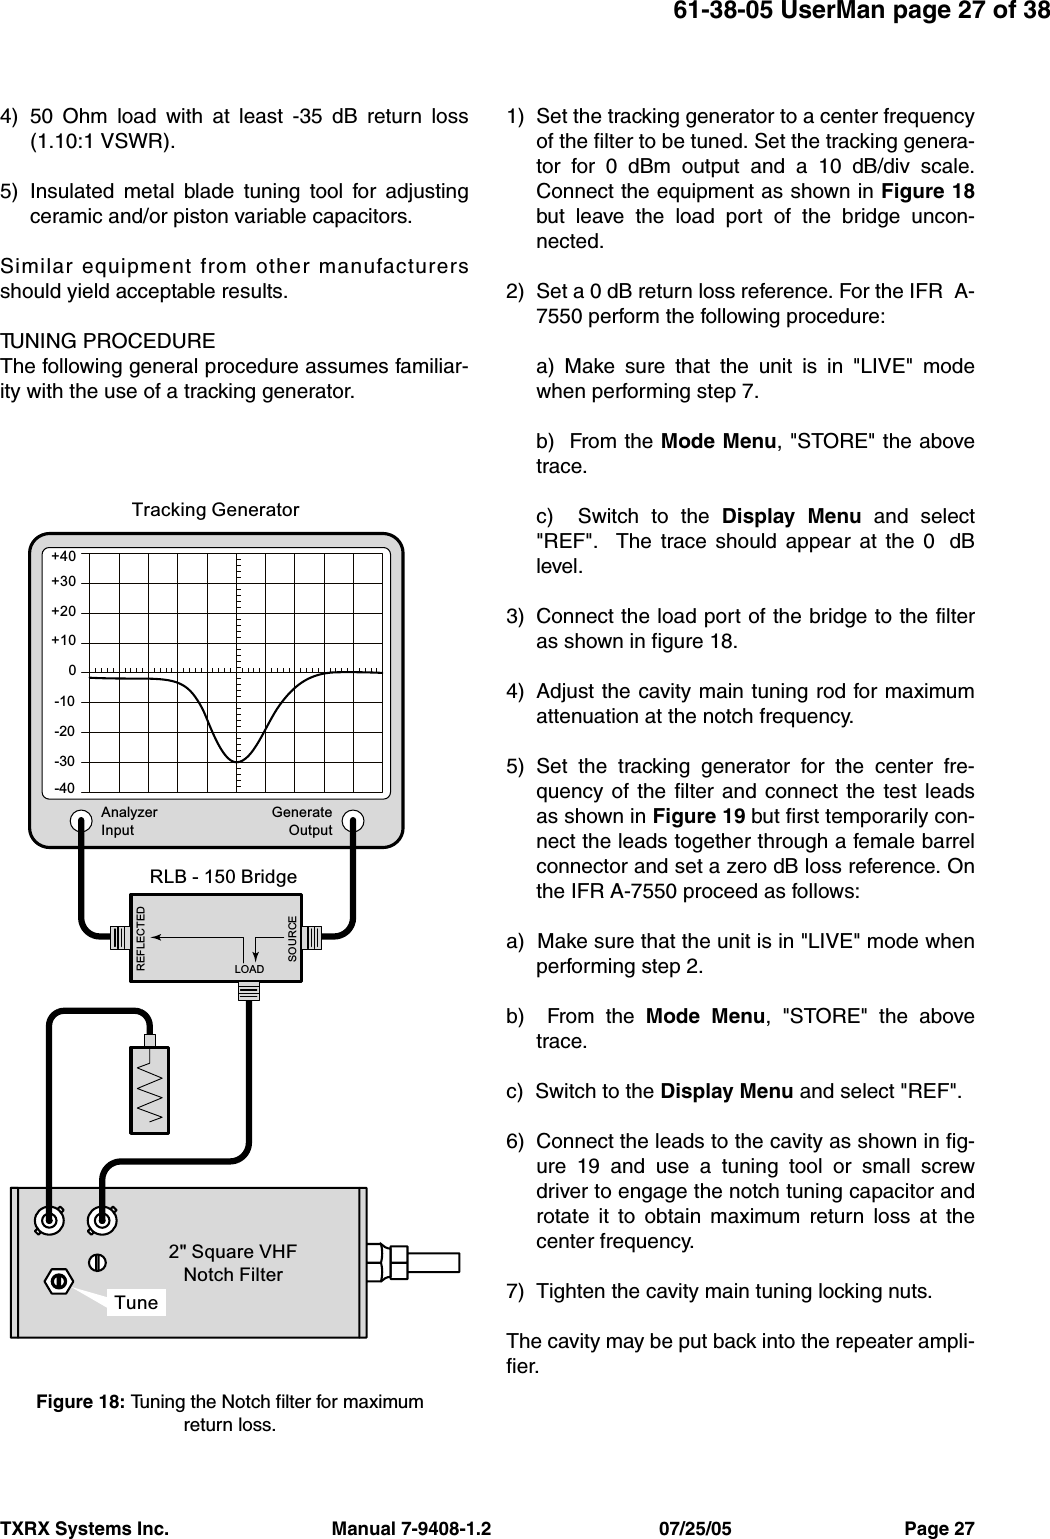 TXRX Systems Inc.                                Manual 7-9408-1.2                                 07/25/05                                  Page 2761-38-05 UserMan page 27 of 384) 50 Ohm load with at least -35 dB return loss(1.10:1 VSWR).5) Insulated metal blade tuning tool for adjustingceramic and/or piston variable capacitors.Similar equipment from other manufacturersshould yield acceptable results.TUNING PROCEDUREThe following general procedure assumes familiar-ity with the use of a tracking generator.1) Set the tracking generator to a center frequencyof the filter to be tuned. Set the tracking genera-tor for 0 dBm output and a 10 dB/div scale.Connect the equipment as shown in Figure 18but leave the load port of the bridge uncon-nected.2) Set a 0 dB return loss reference. For the IFR  A-7550 perform the following procedure:a) Make sure that the unit is in &quot;LIVE&quot; modewhen performing step 7.b)  From the Mode Menu, &quot;STORE&quot; the abovetrace.c)  Switch to the Display Menu and select&quot;REF&quot;.  The trace should appear at the 0  dBlevel.3) Connect the load port of the bridge to the filteras shown in figure 18.4) Adjust the cavity main tuning rod for maximumattenuation at the notch frequency.5) Set the tracking generator for the center fre-quency of the filter and connect the test leadsas shown in Figure 19 but first temporarily con-nect the leads together through a female barrelconnector and set a zero dB loss reference. Onthe IFR A-7550 proceed as follows:a)  Make sure that the unit is in &quot;LIVE&quot; mode whenperforming step 2.b)  From the Mode Menu, &quot;STORE&quot; the abovetrace.c)  Switch to the Display Menu and select &quot;REF&quot;.6) Connect the leads to the cavity as shown in fig-ure 19 and use a tuning tool or small screwdriver to engage the notch tuning capacitor androtate it to obtain maximum return loss at thecenter frequency. 7) Tighten the cavity main tuning locking nuts.The cavity may be put back into the repeater ampli-fier.LOADREFLECTEDSOURCEAnalyzerInputGenerateOutput+30+40+20+100-10-20-30-40RLB - 150 Bridge2&quot; Square VHFNotch FilterTracking GeneratorTuneFigure 18: Tuning the Notch filter for maximumreturn loss.